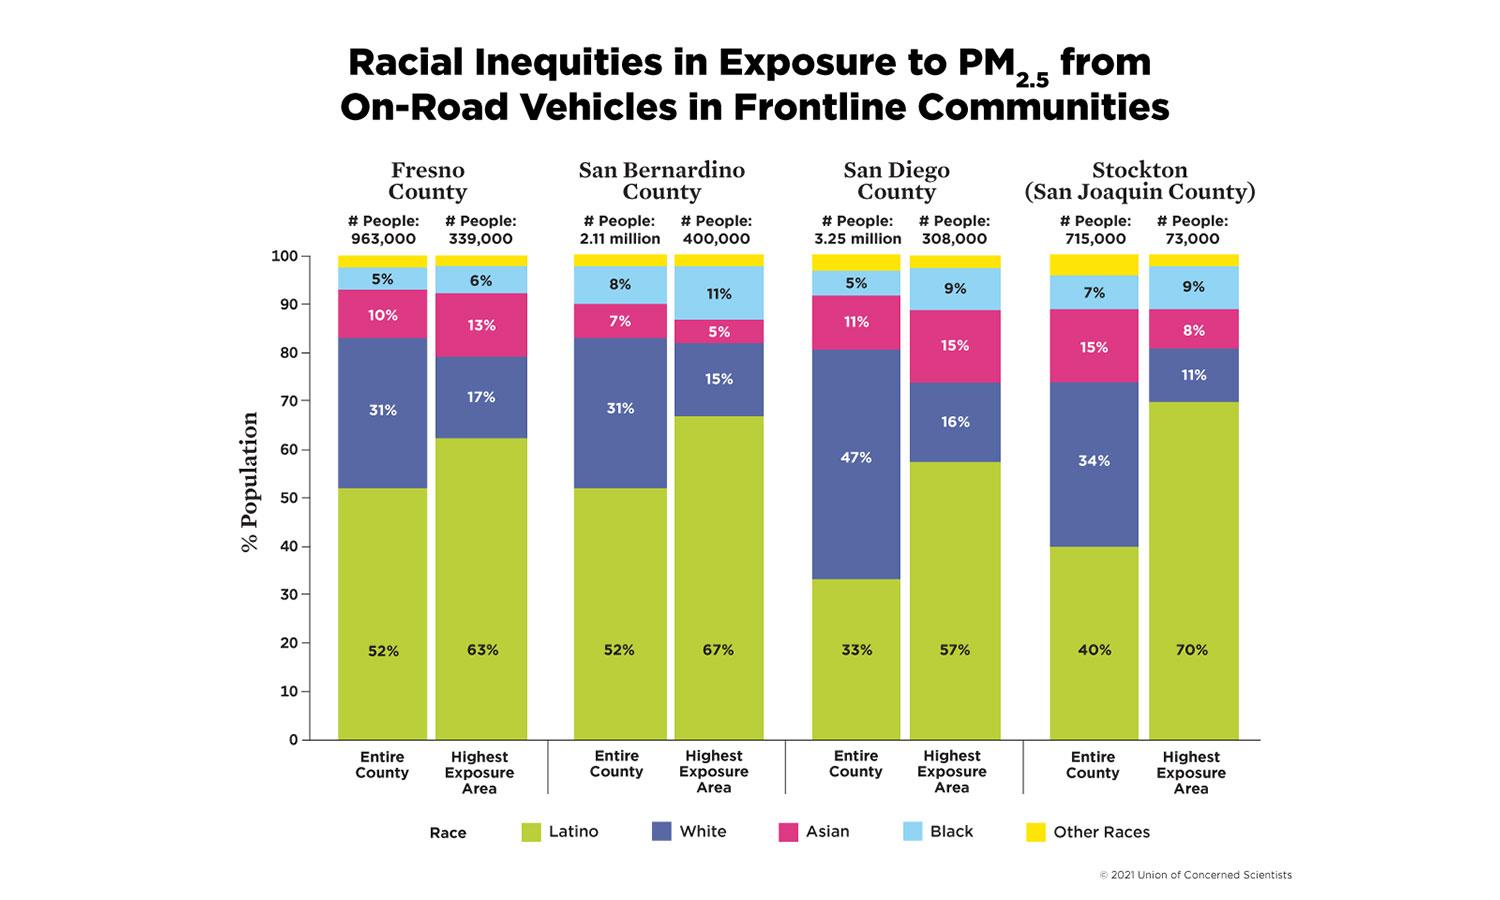 A chart showing racial inequities in exposure to PM2.5 from on-road vehicles